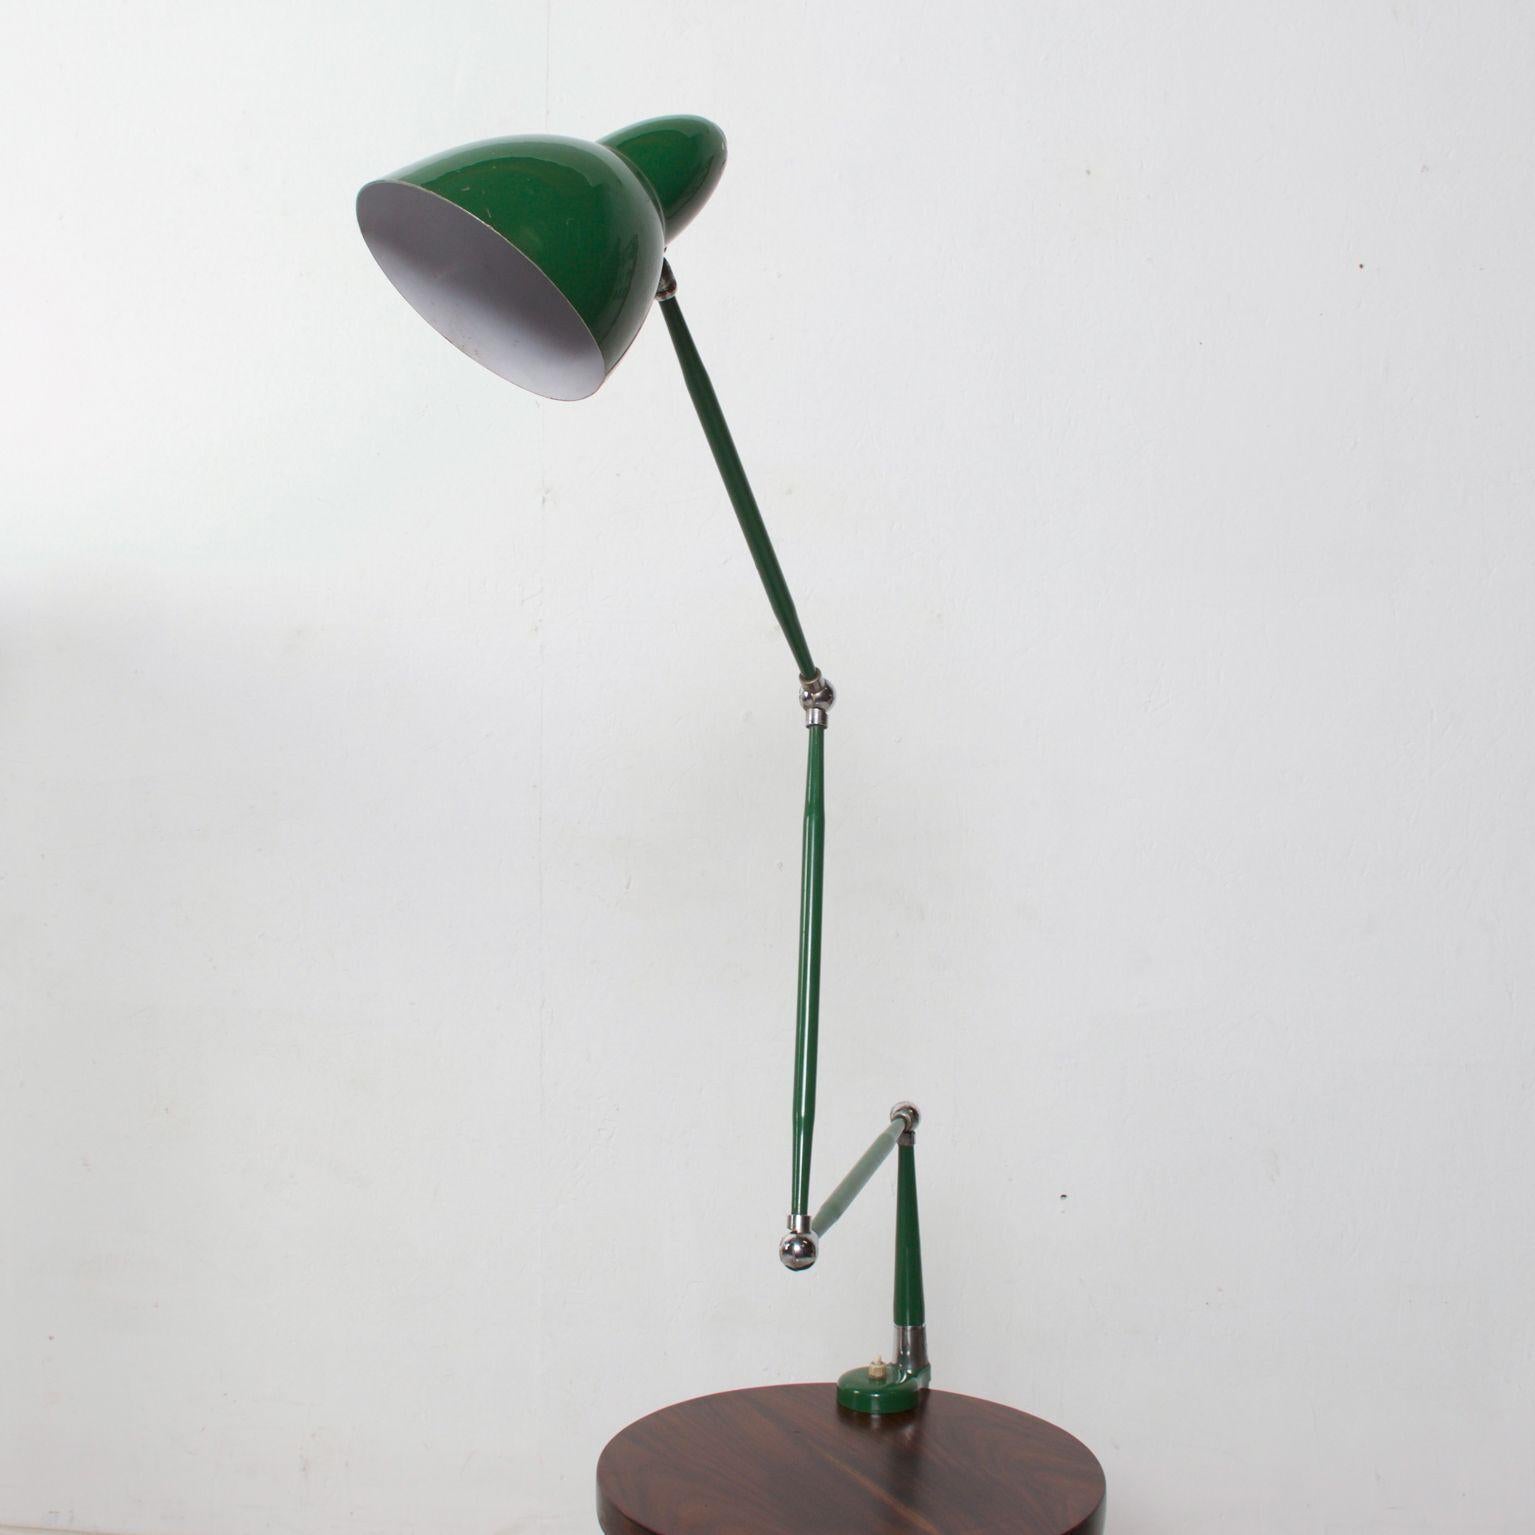 For your pleasure: Mid-Century Modern Stilnovo Style adjustable clamp desk table lamp in green.

Task drafting lamp design in the style of Stilnovo, Italy, 1950s. No signature or label present.

Dimensions: 53